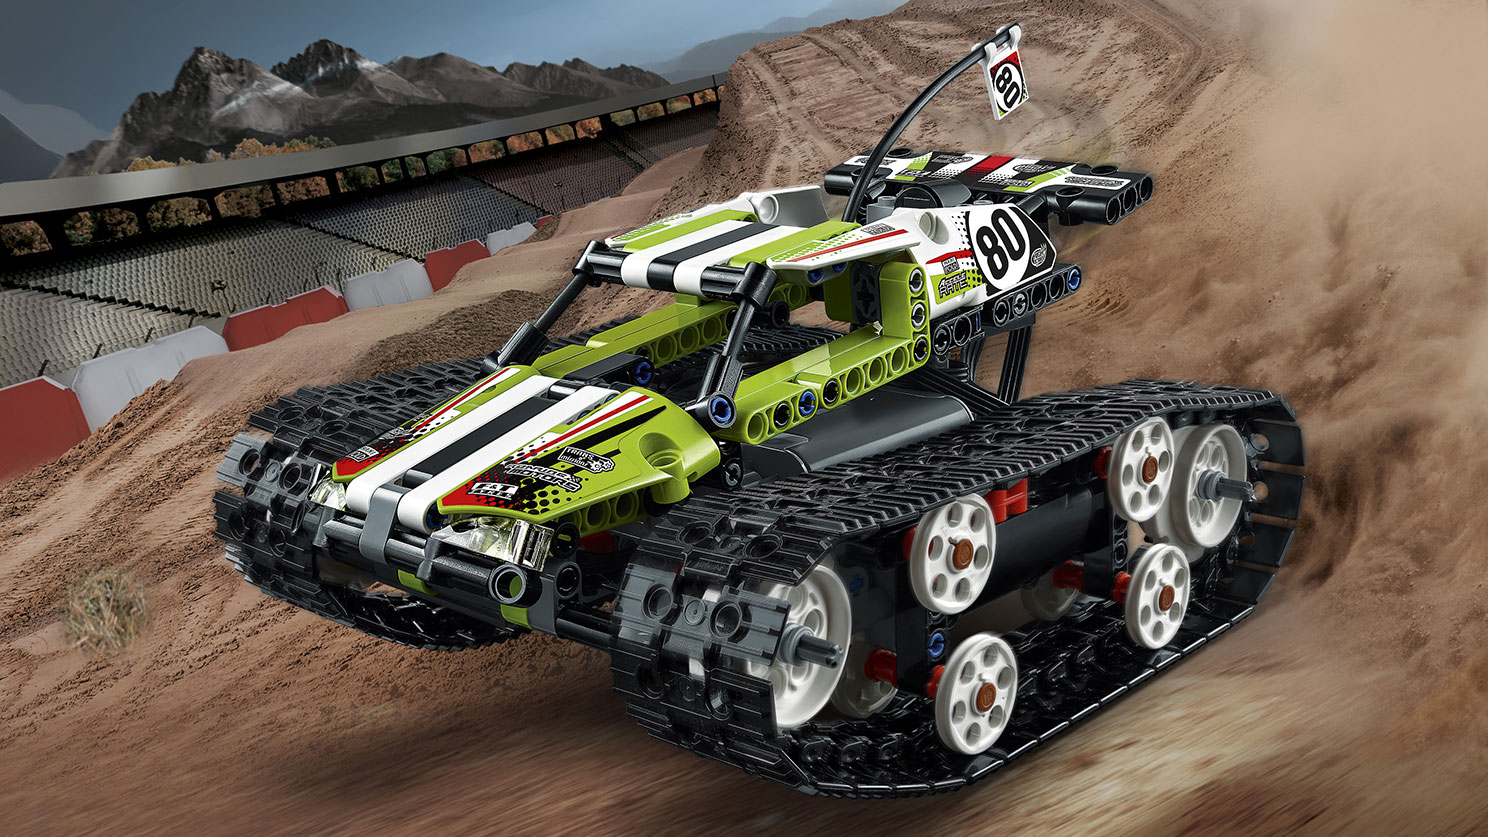 LEGO Technic - 42065 RC Tracked Racer - Get ready for high-speed action with the high-powered RC Tracked Racer, featuring a fresh lime-green, white and black color scheme with cool stickers, roll bars and huge rugged tracks for ultimate maneuverability!